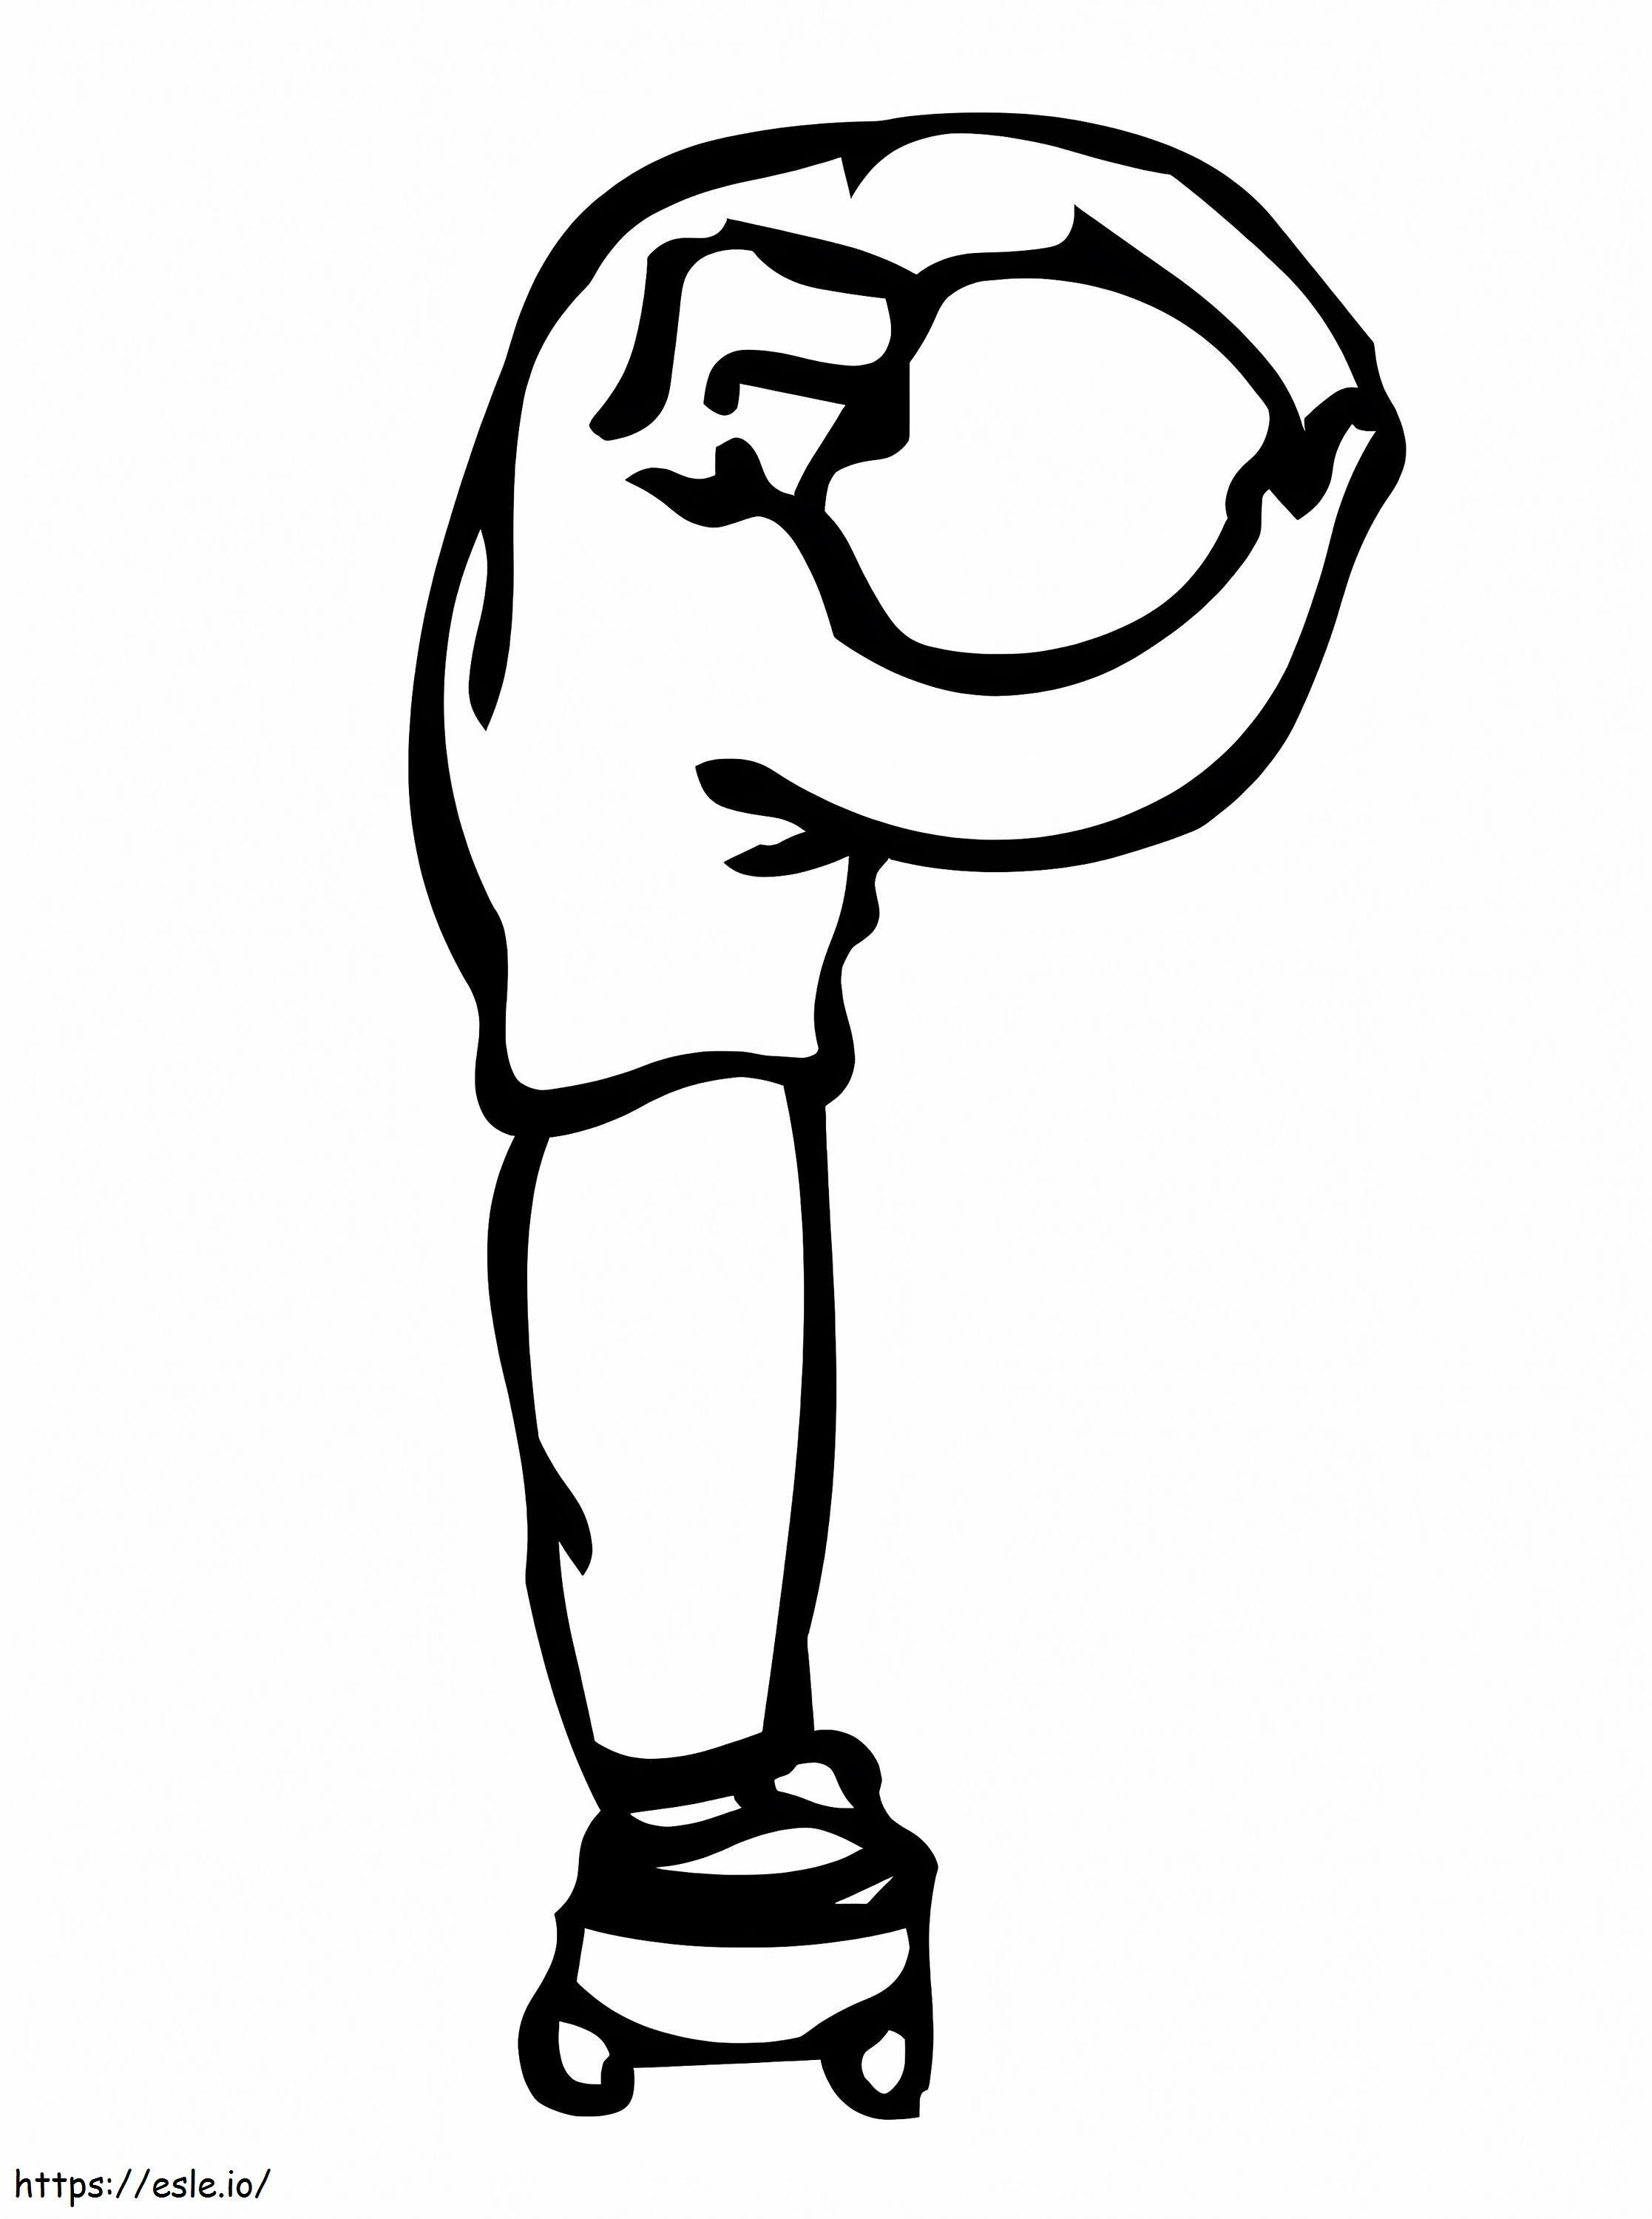 Letter P 2 coloring page